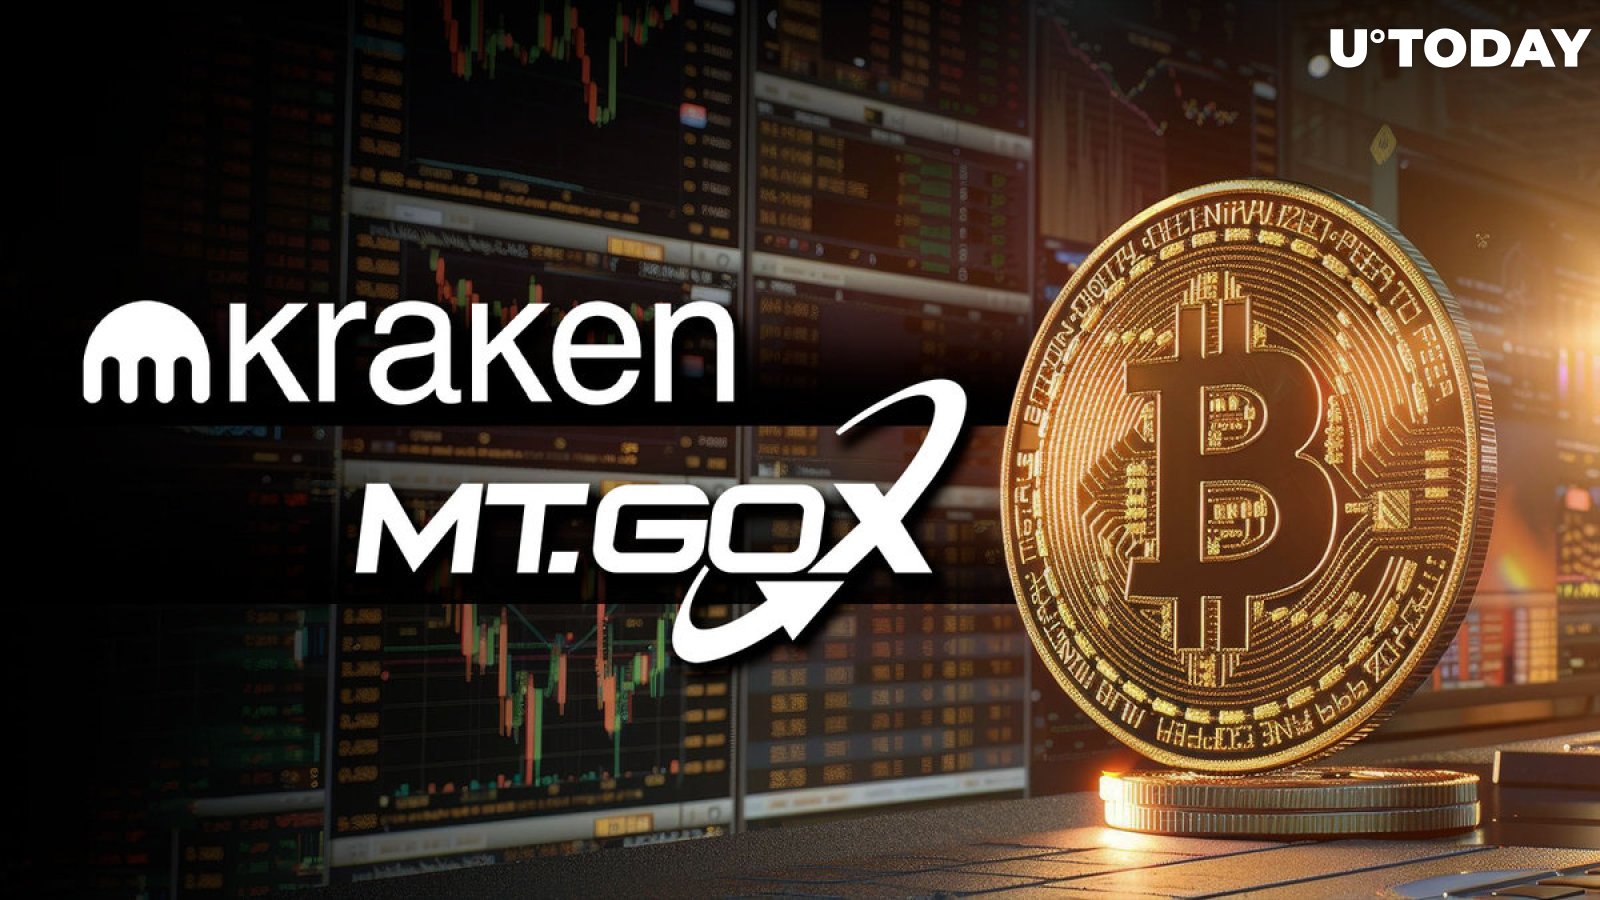 Kraken Secures 48,641 Bitcoin From Mt. Gox, What Comes Next?